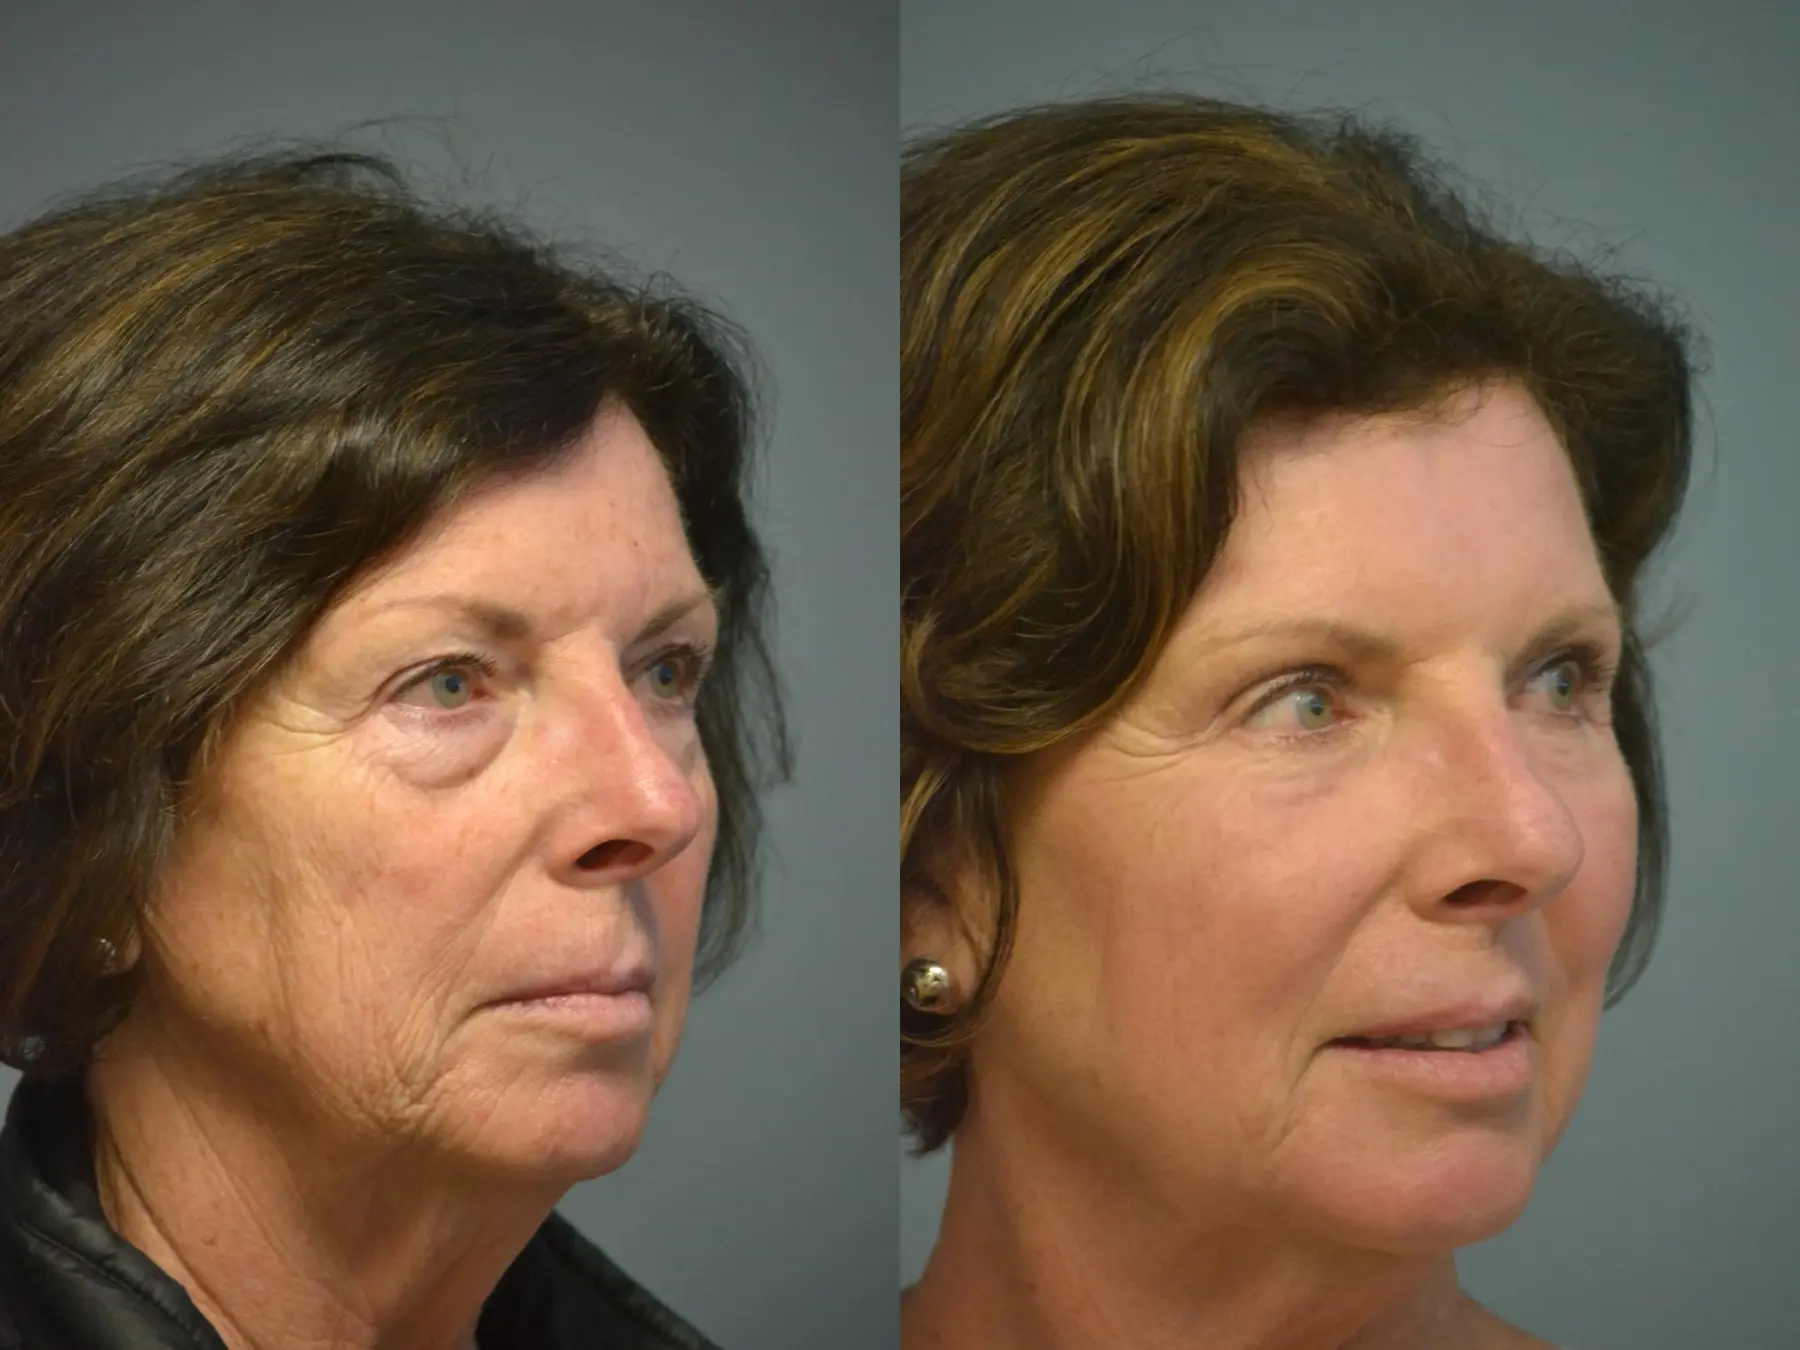 Blepharoplasty: Patient 3 - Before and After 3